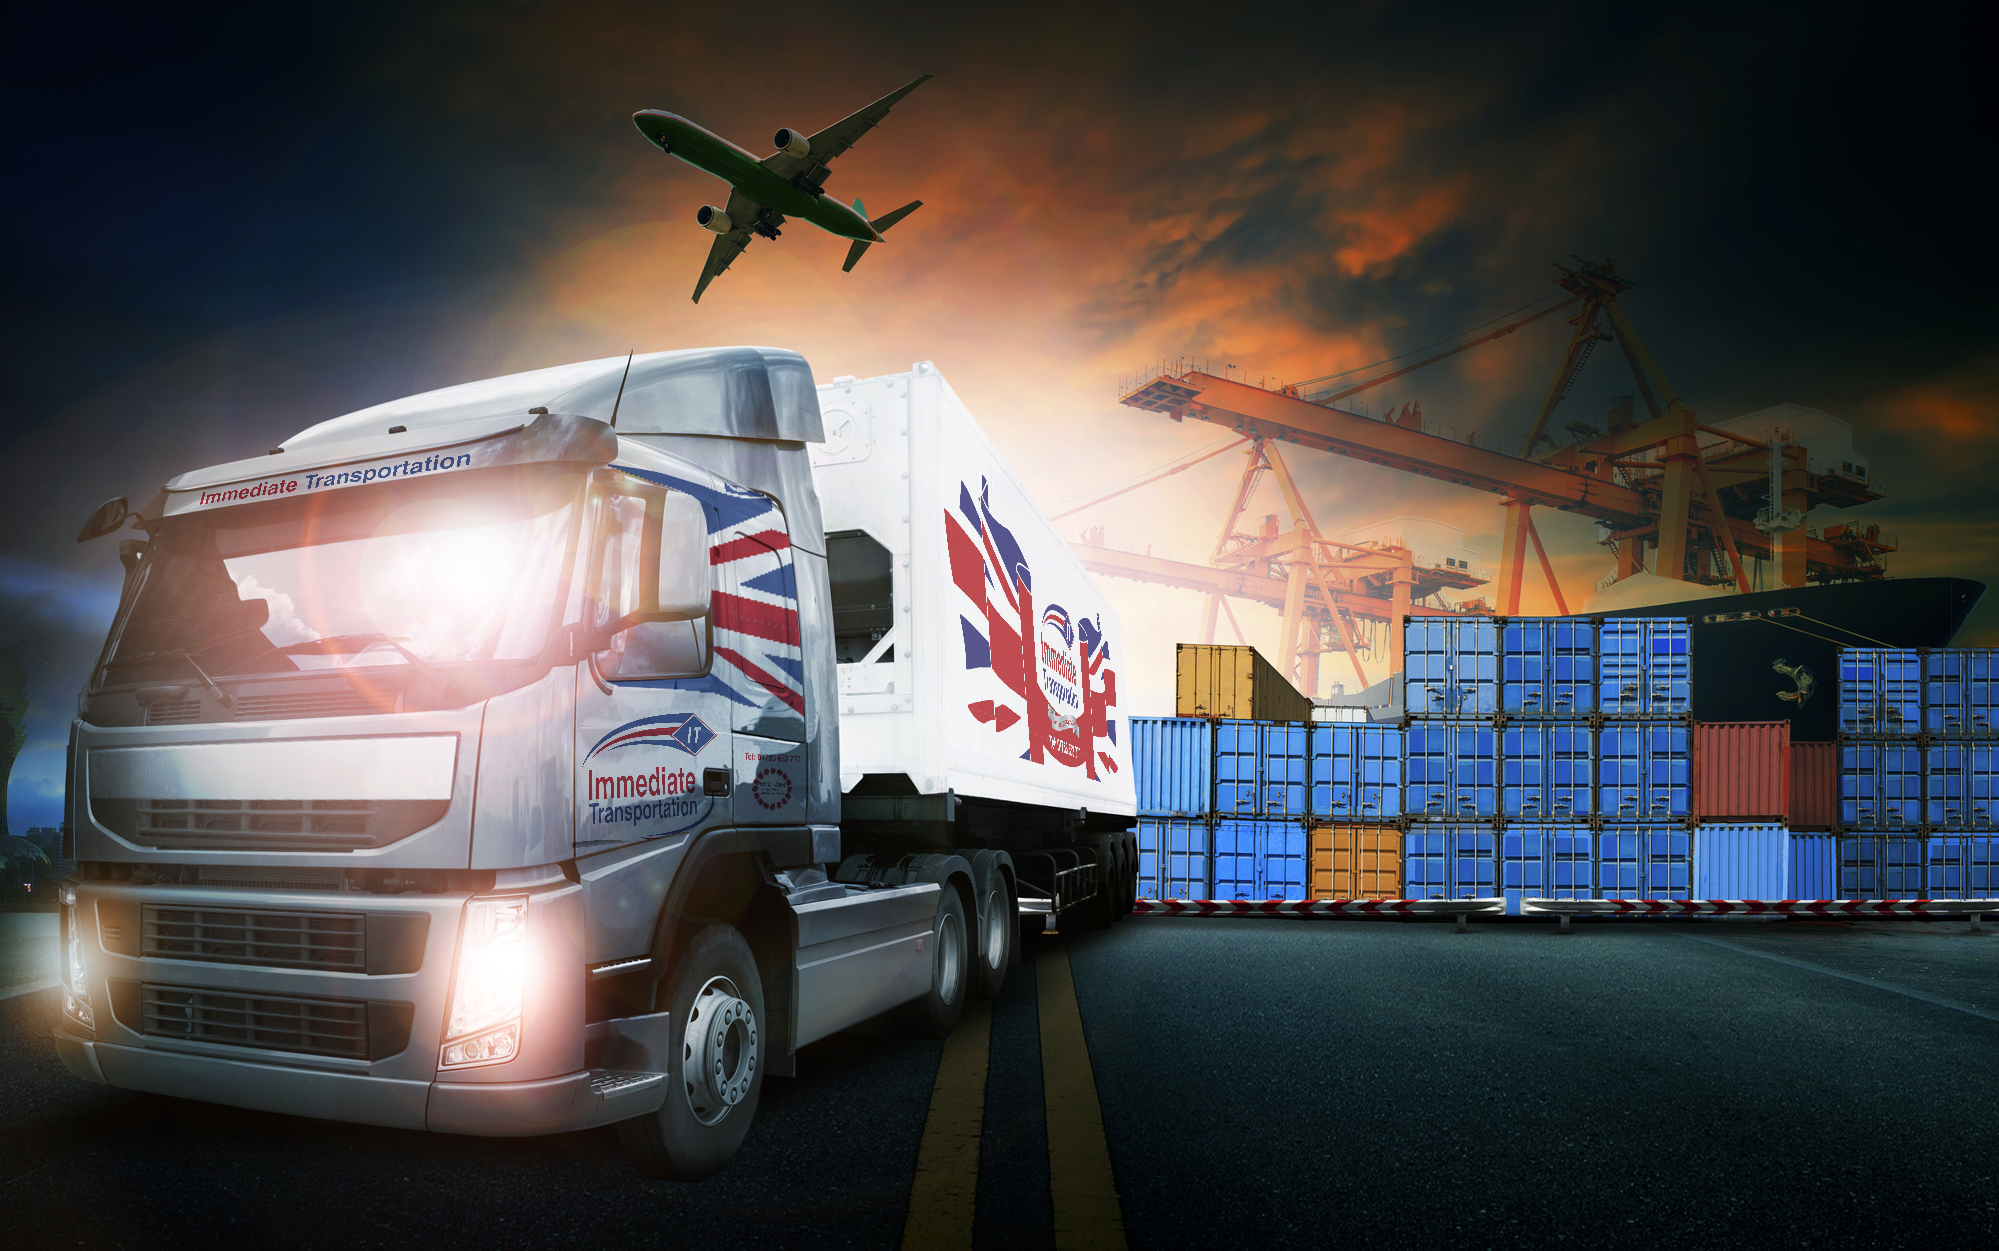 Aeroplane, shipping containers and Immediate Transport lorry